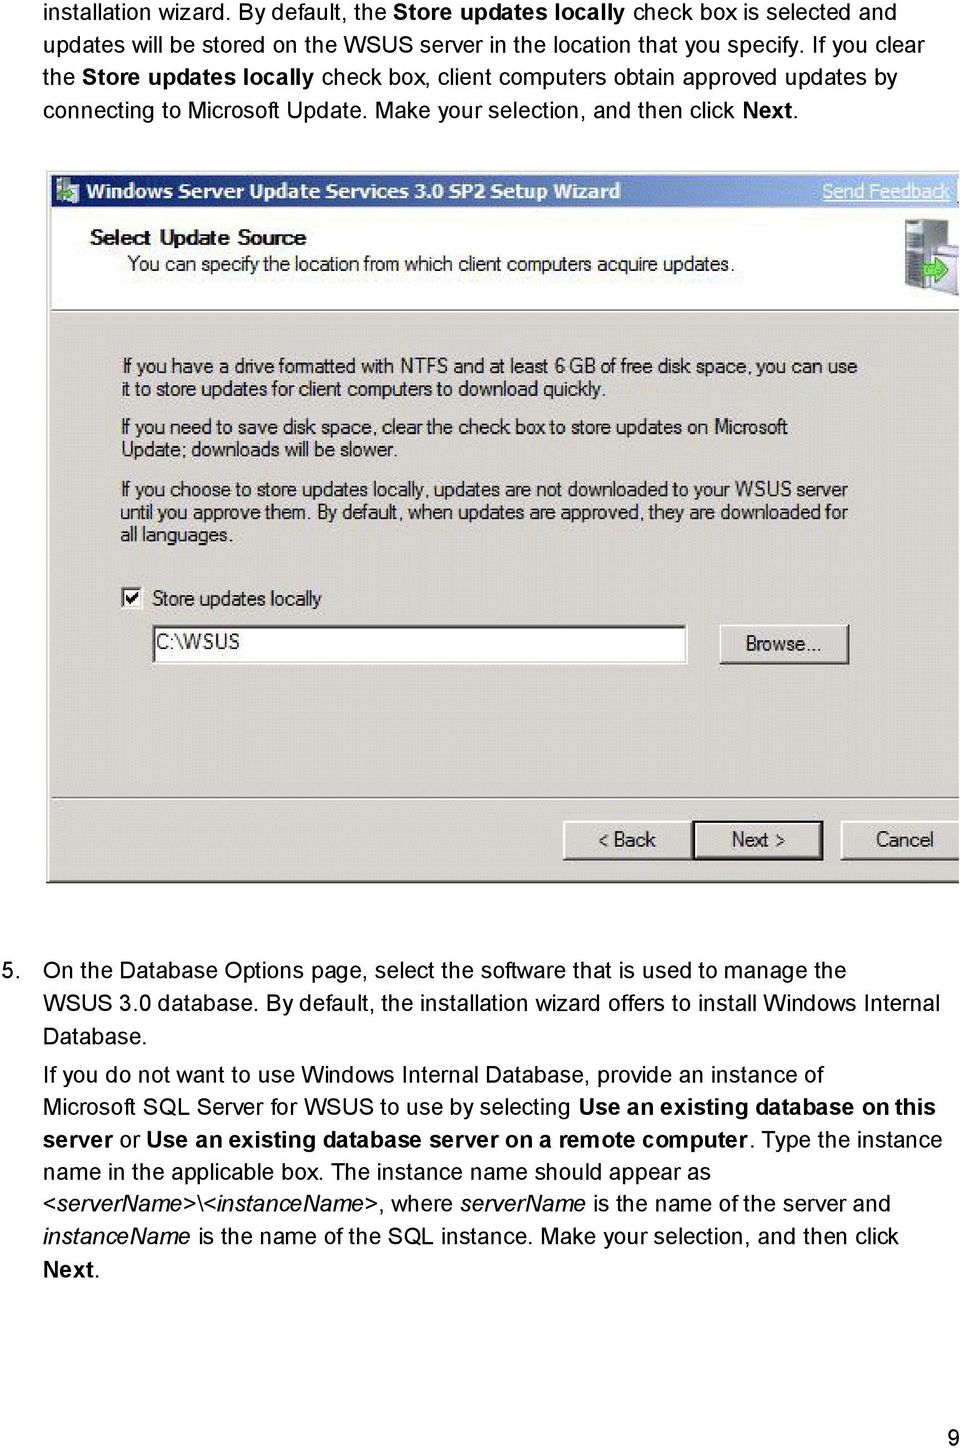 On the Database Options page, select the software that is used to manage the WSUS 3.0 database. By default, the installation wizard offers to install Windows Internal Database.